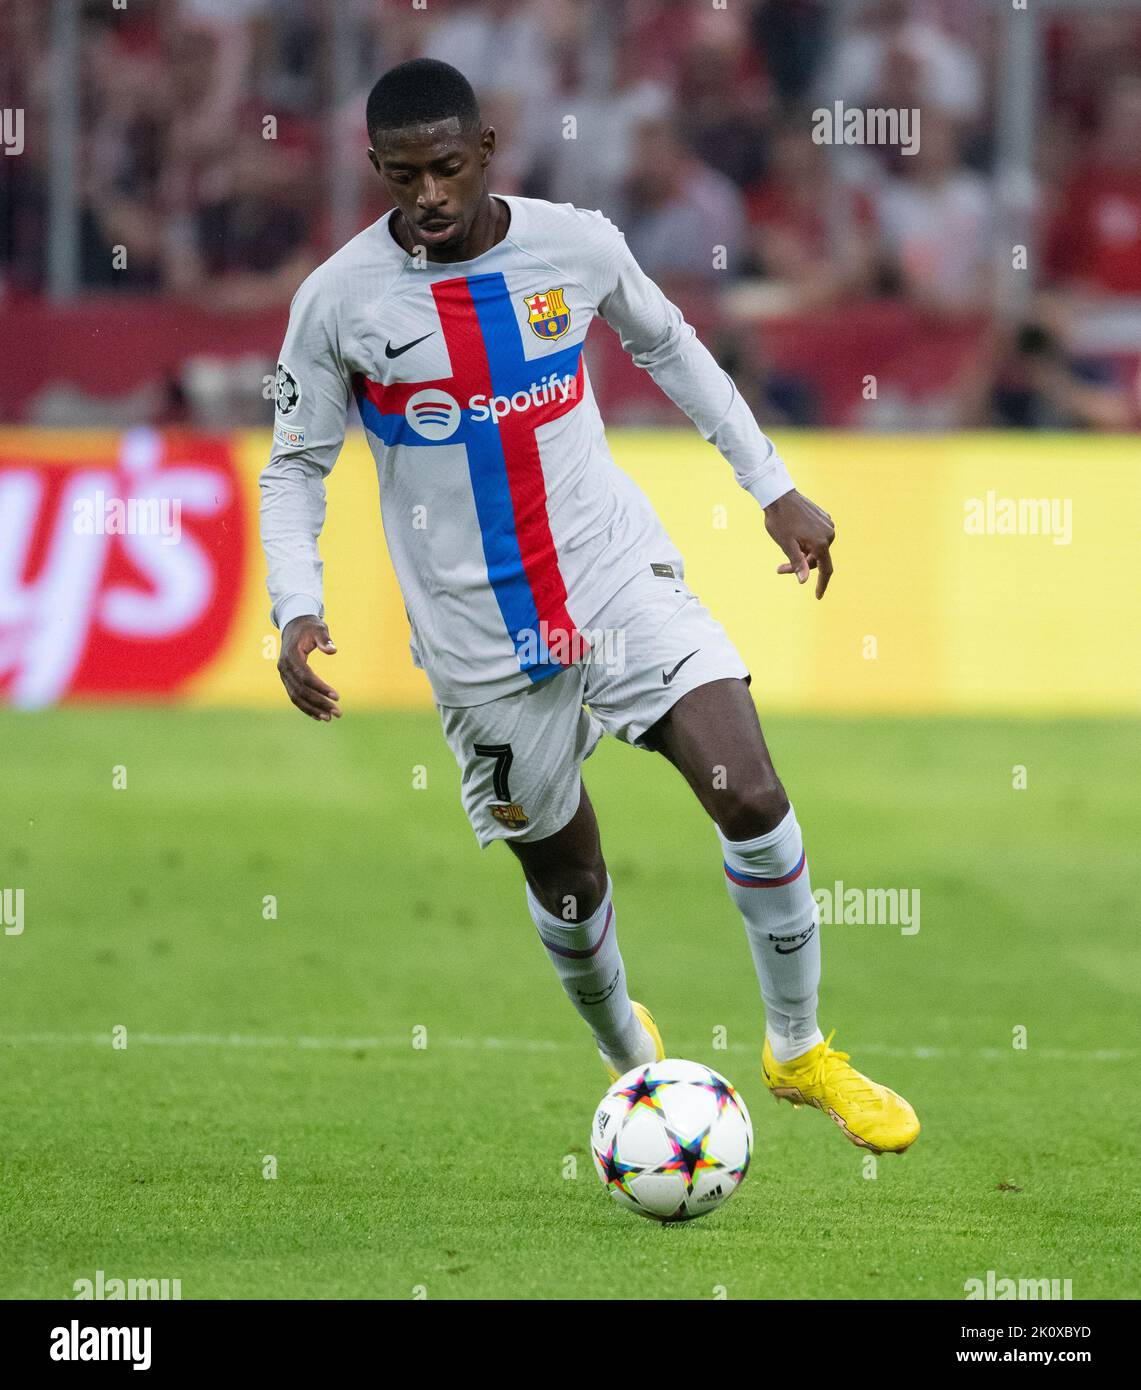 Munich, Germany. 13th Sep, 2022. Soccer: Champions League, Bayern Munich - FC Barcelona, group stage, Group C, matchday 2 at Allianz Arena. Ousmane Dembele of Barcelona in action. Credit: Sven Hoppe/dpa/Alamy Live News Stock Photo